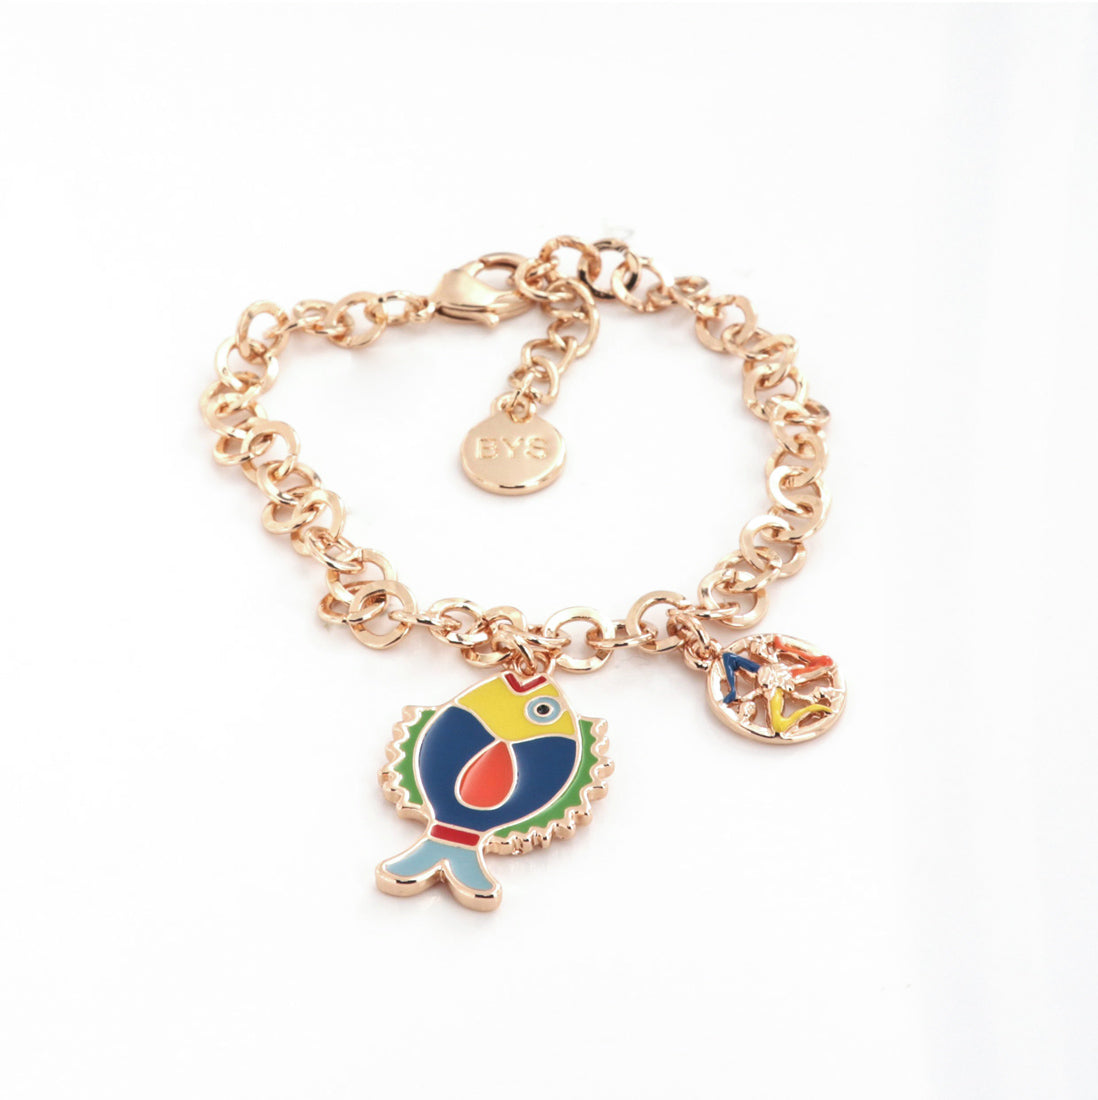 Rolò shirt metal bracelet, with pendant fish embellished with colored glazes